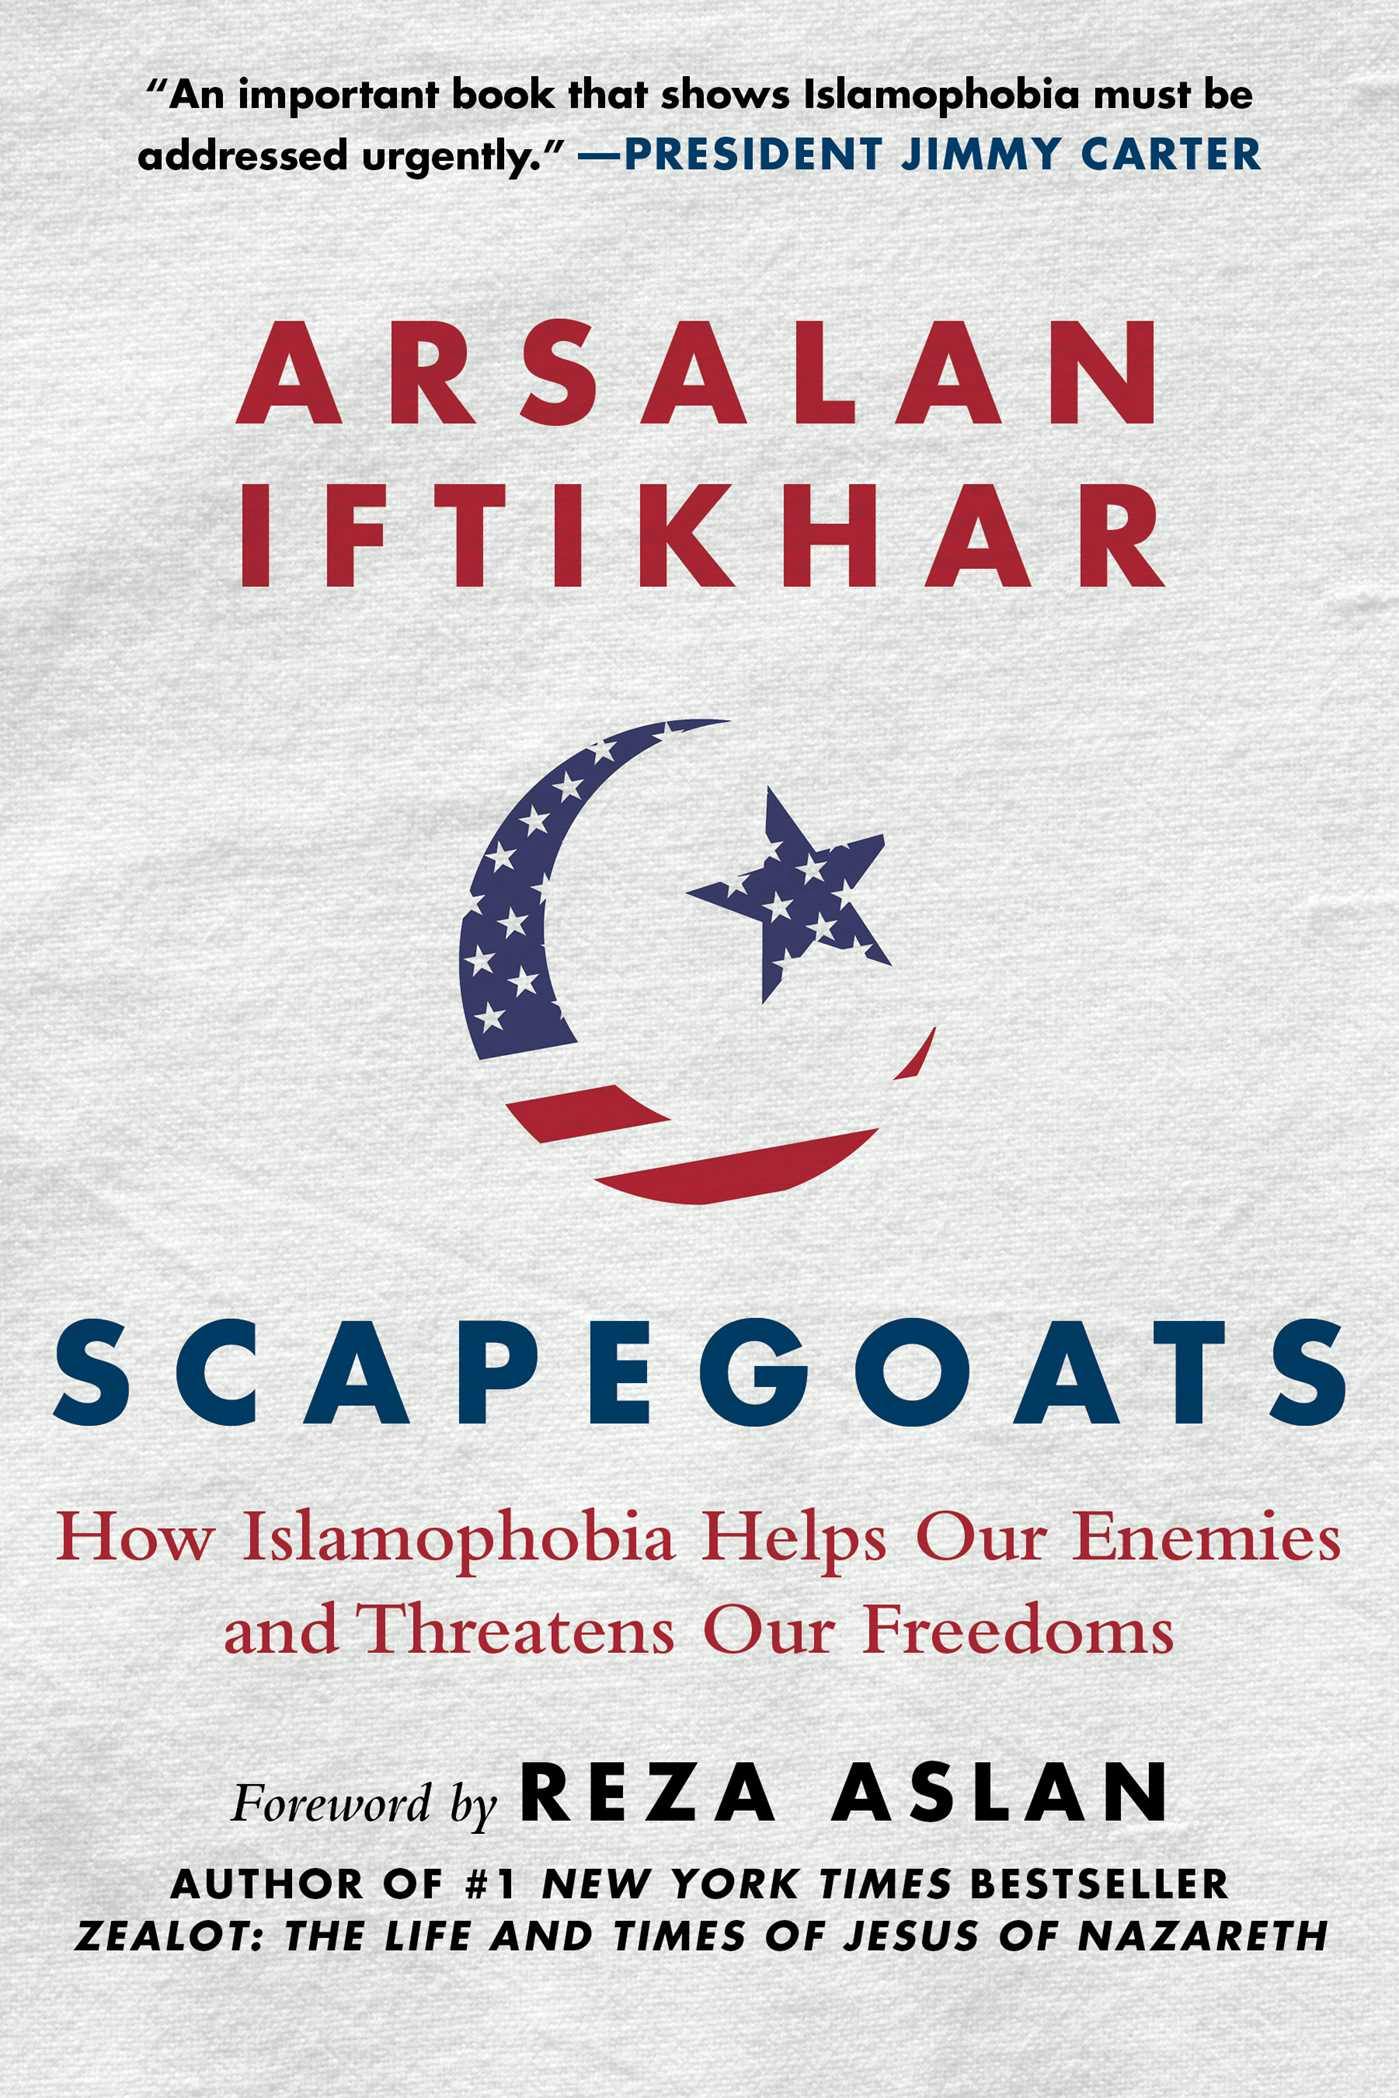 Scapegoats: How Islamophobia Helps Our Enemies and Threatens Our Freedoms - Arsalan Iftikhar